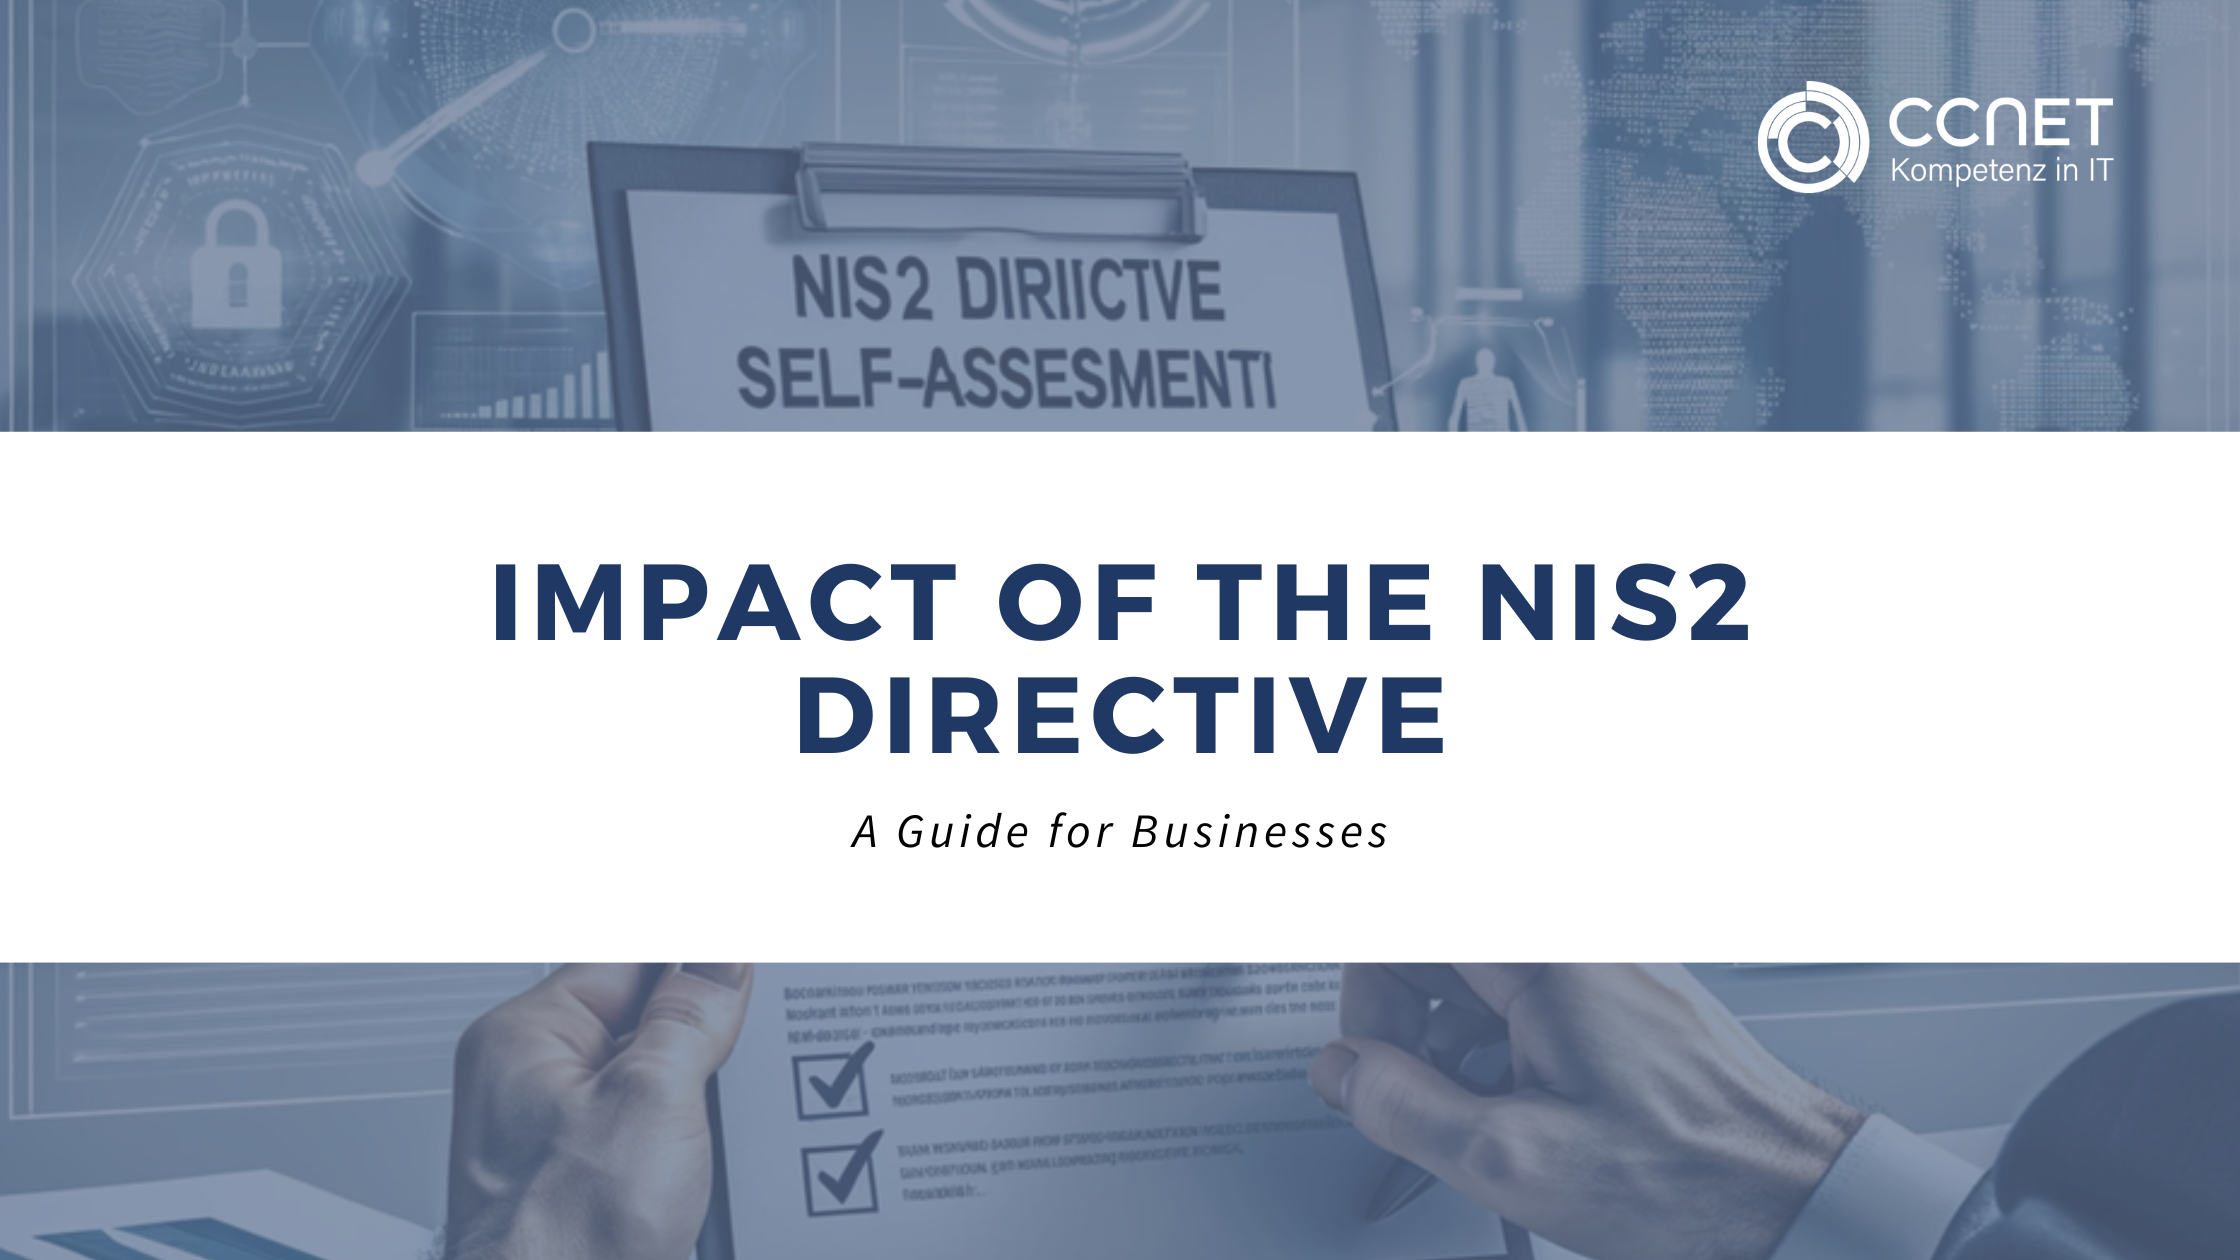 Impact of the NIS2 Directive: A Guide for Businesses